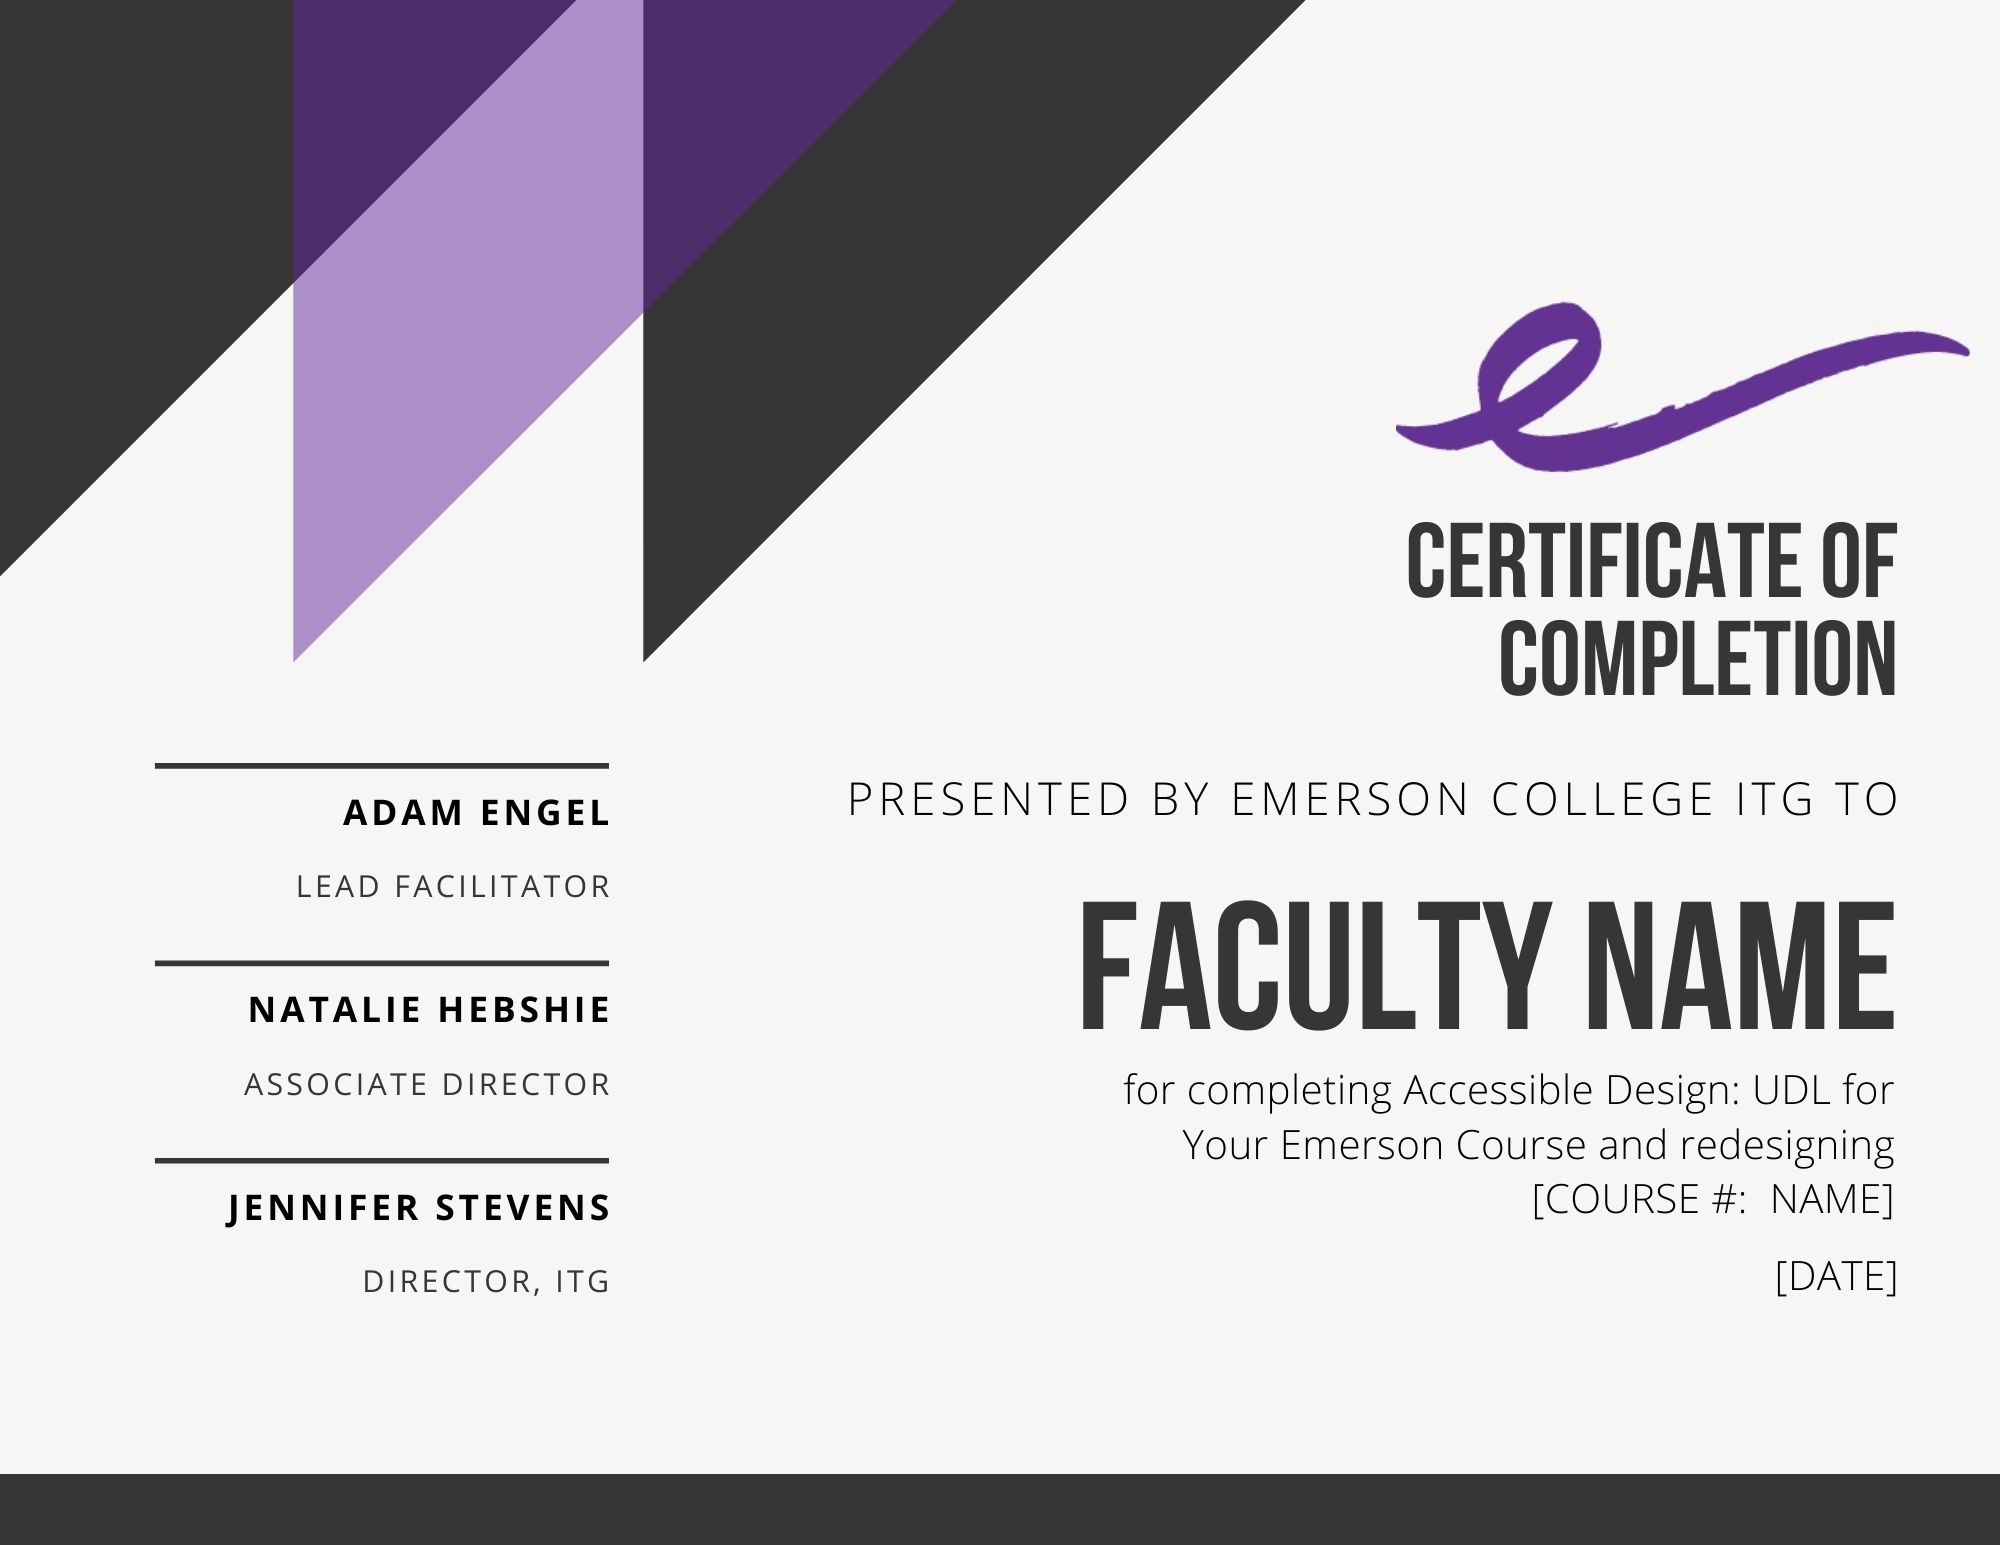 Sample Accessible Design certificate of completion: fancy-looking document with purple triangles and the emerson swooshy E